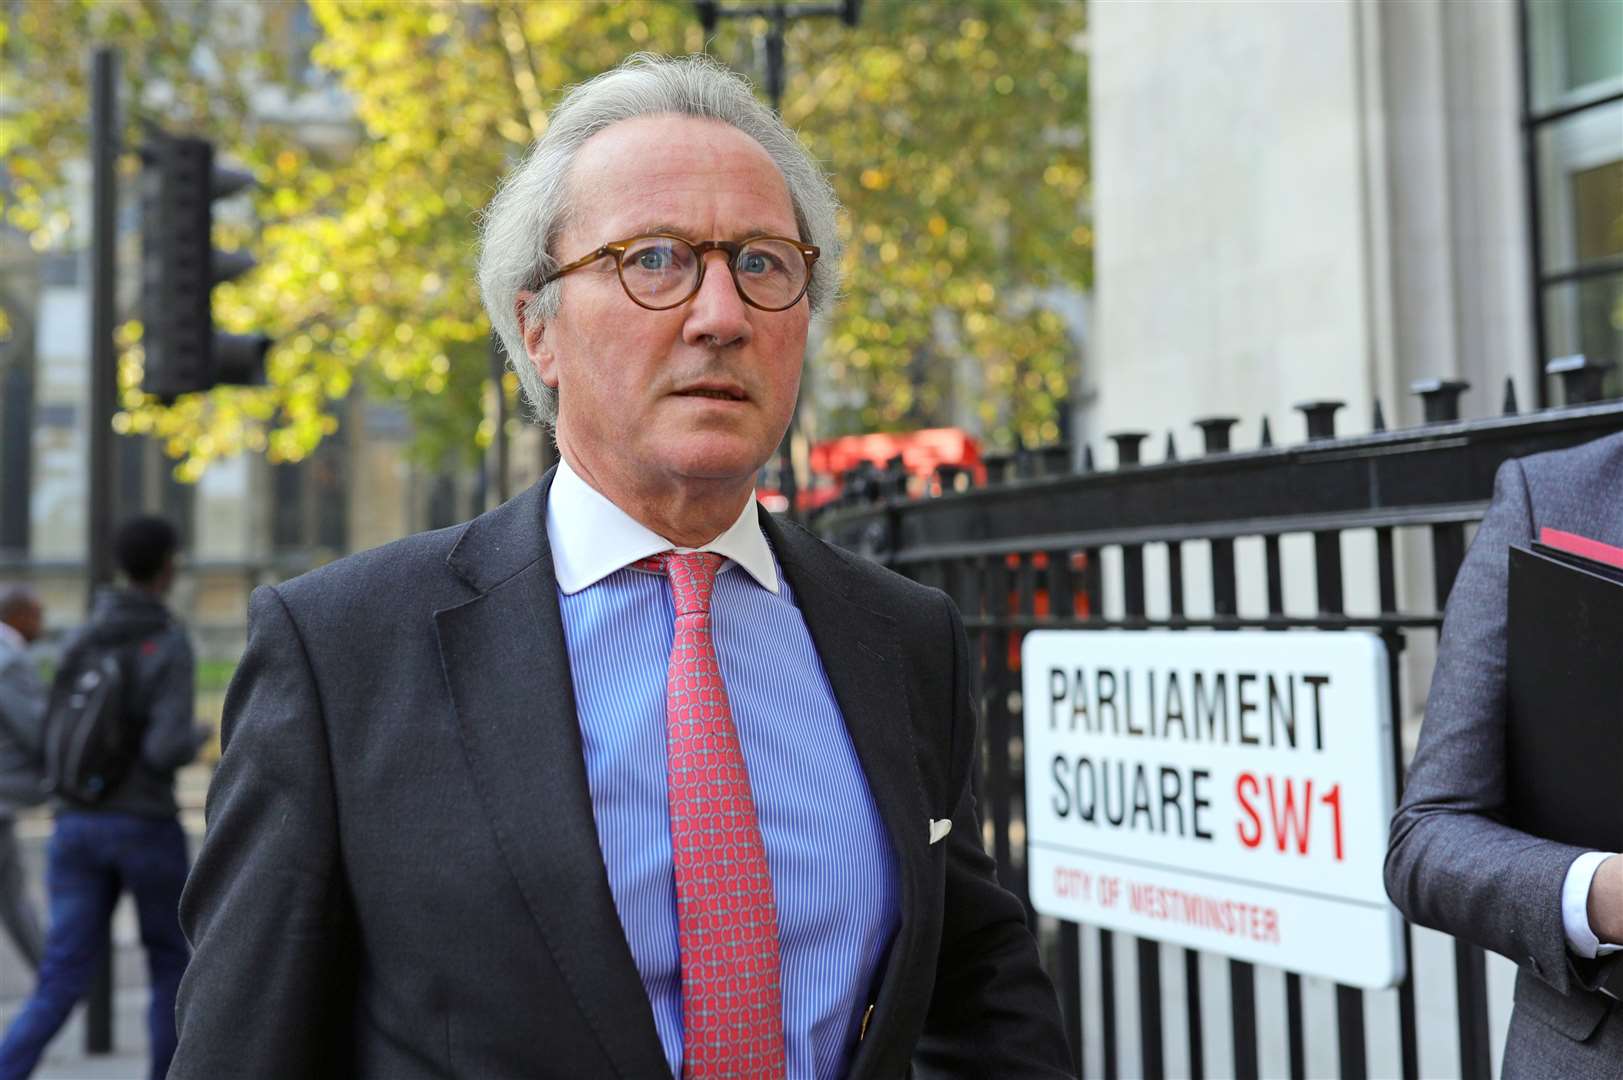 Lord Keen said it was his duty to resign (Aaron Chown/PA)